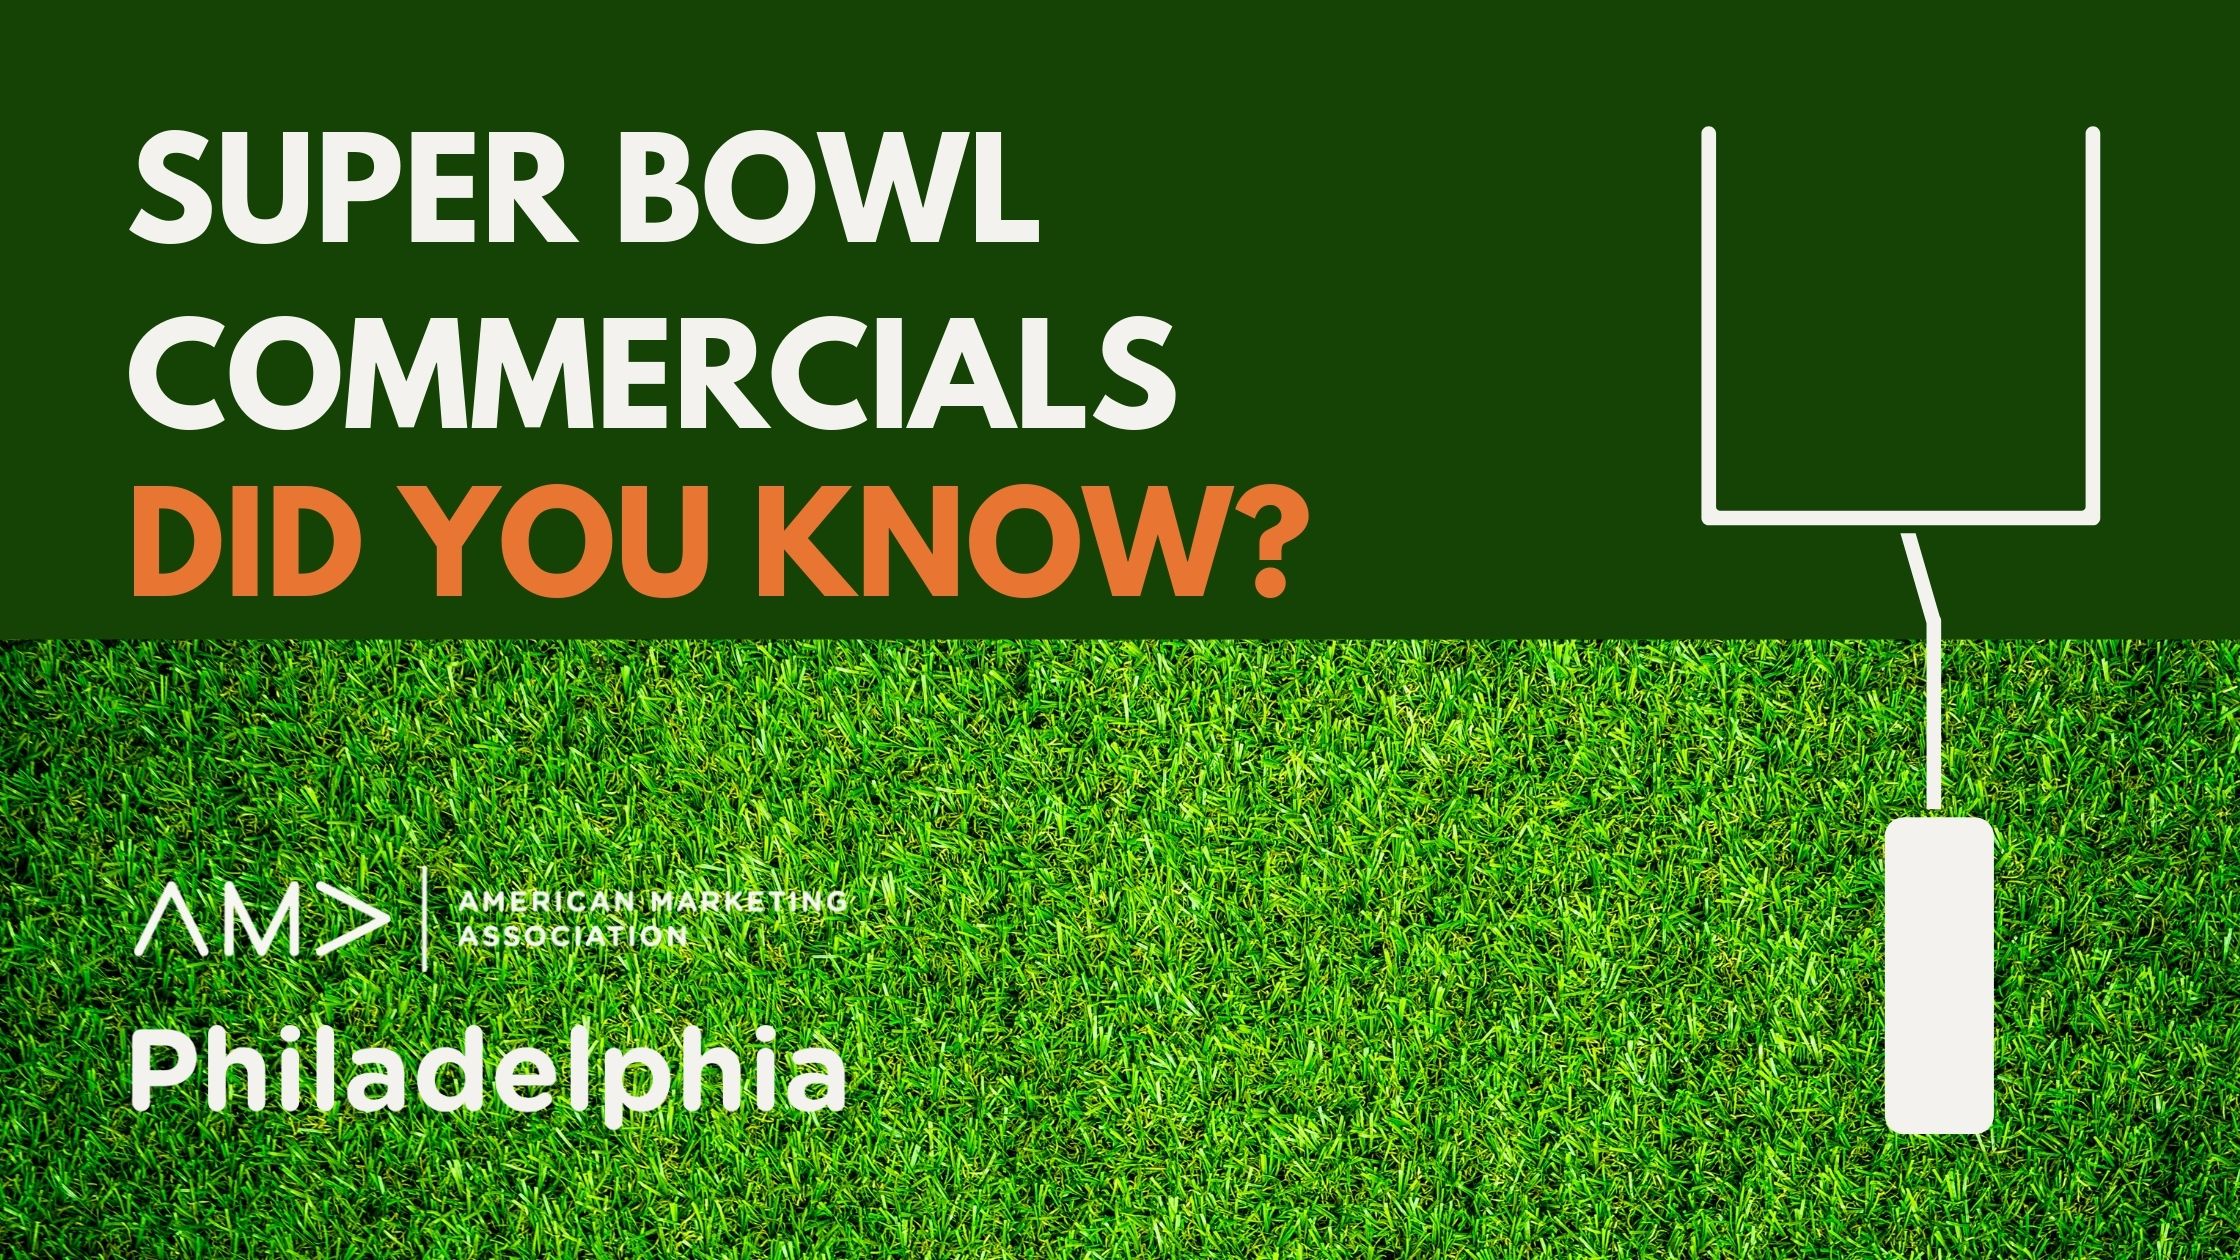 Super Bowl Commercials – The Stats At Stake